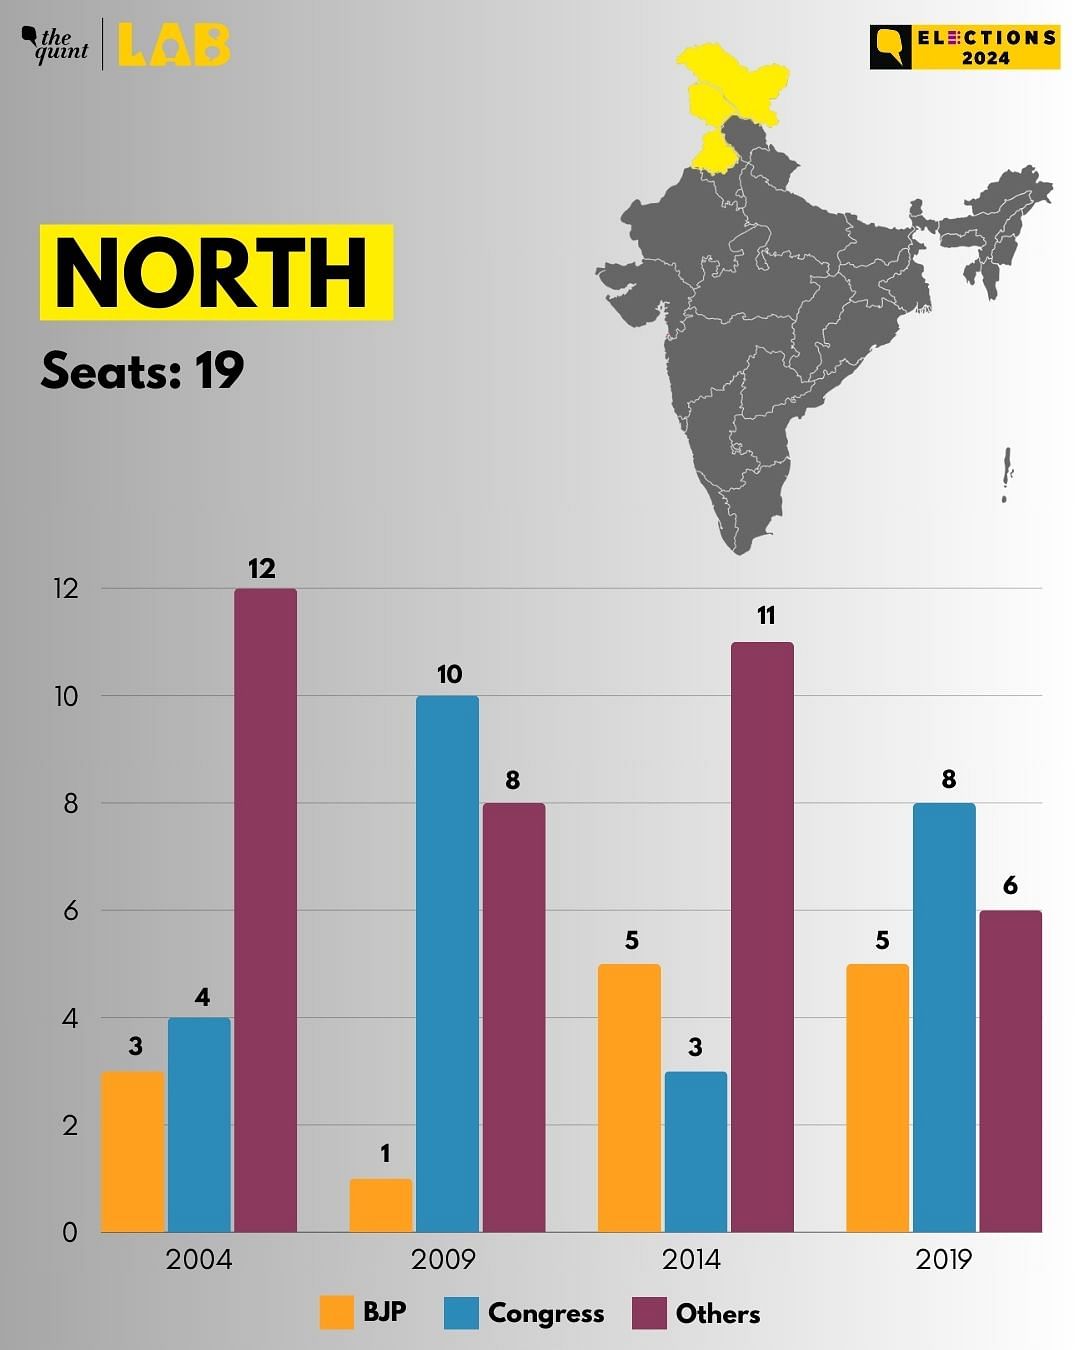 Take a look at the region-wise seat share of BJP and Congress from the past four Lok Sabha elections.